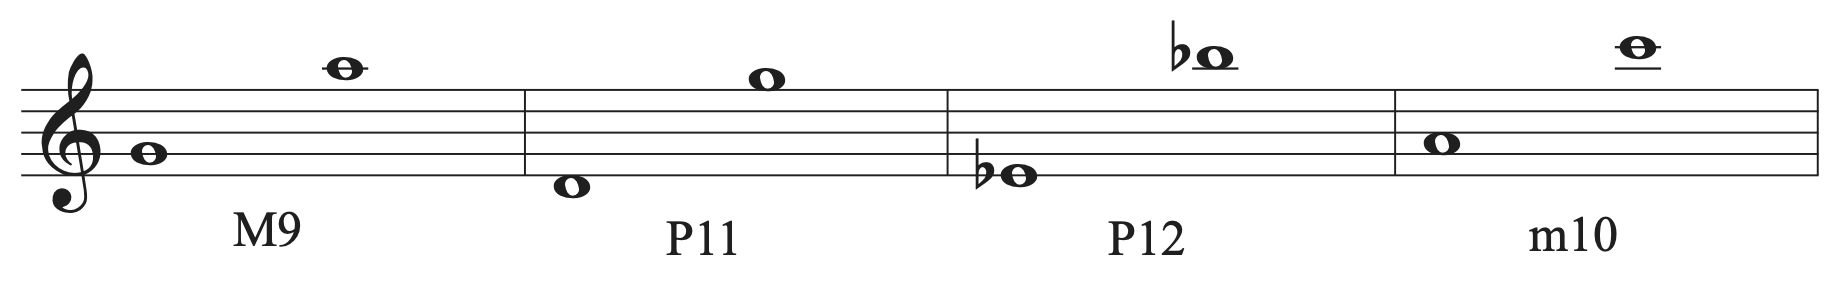 Compound intervals major ninth, perfect eleventh, perfect twelfth, and minor tenth shown on a staff.